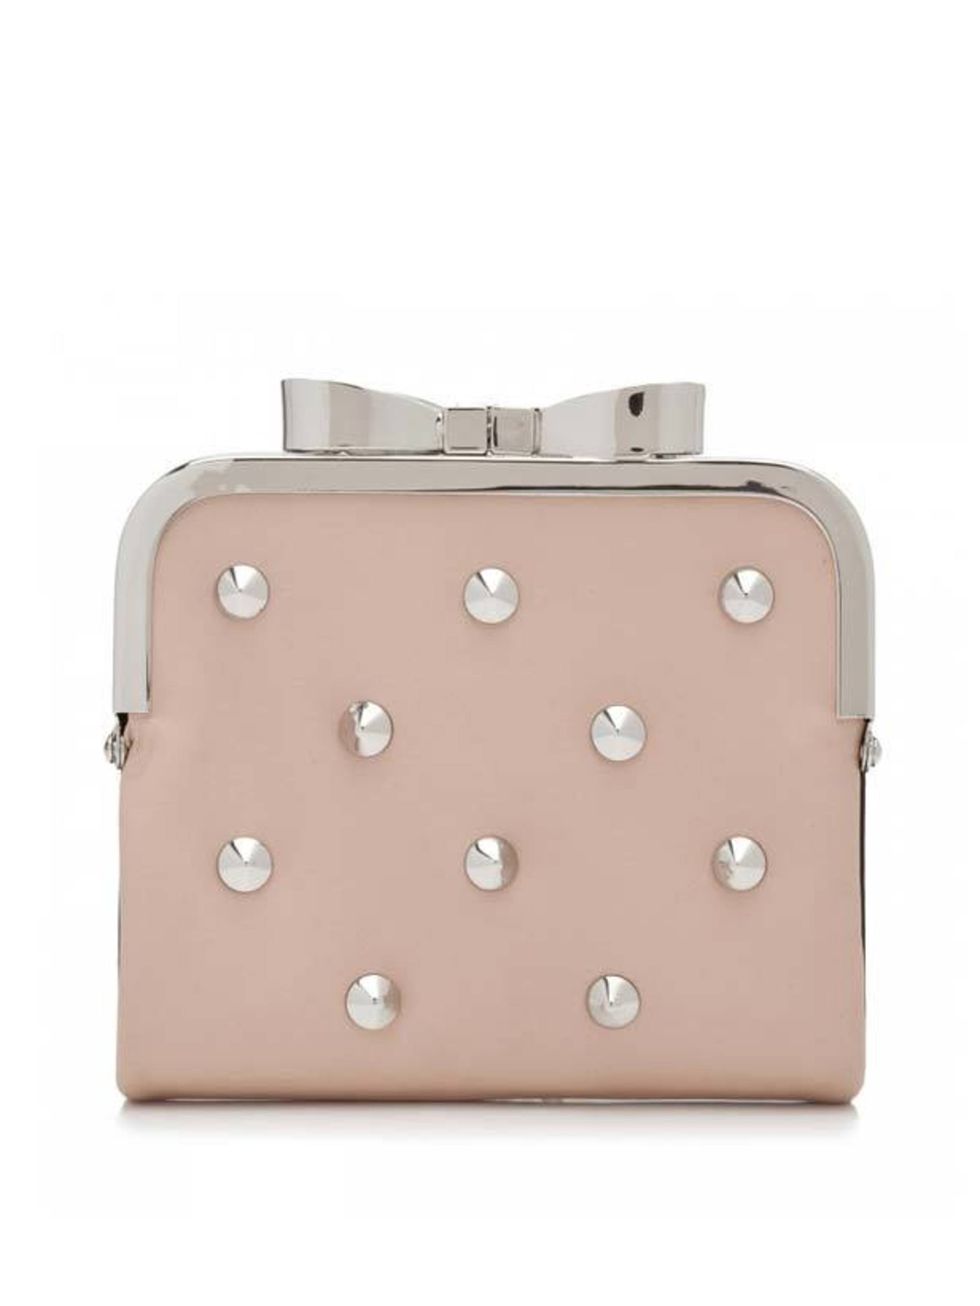 <p> </p><p>Accessories are key to a well put together look and this super cute purse will give any outfit a feminine edge. Sonia by Sonia Rykiel studded purse, £150, at <a href="http://www.harveynichols.com/womens/highlights/new-in/s352465-studded-leather